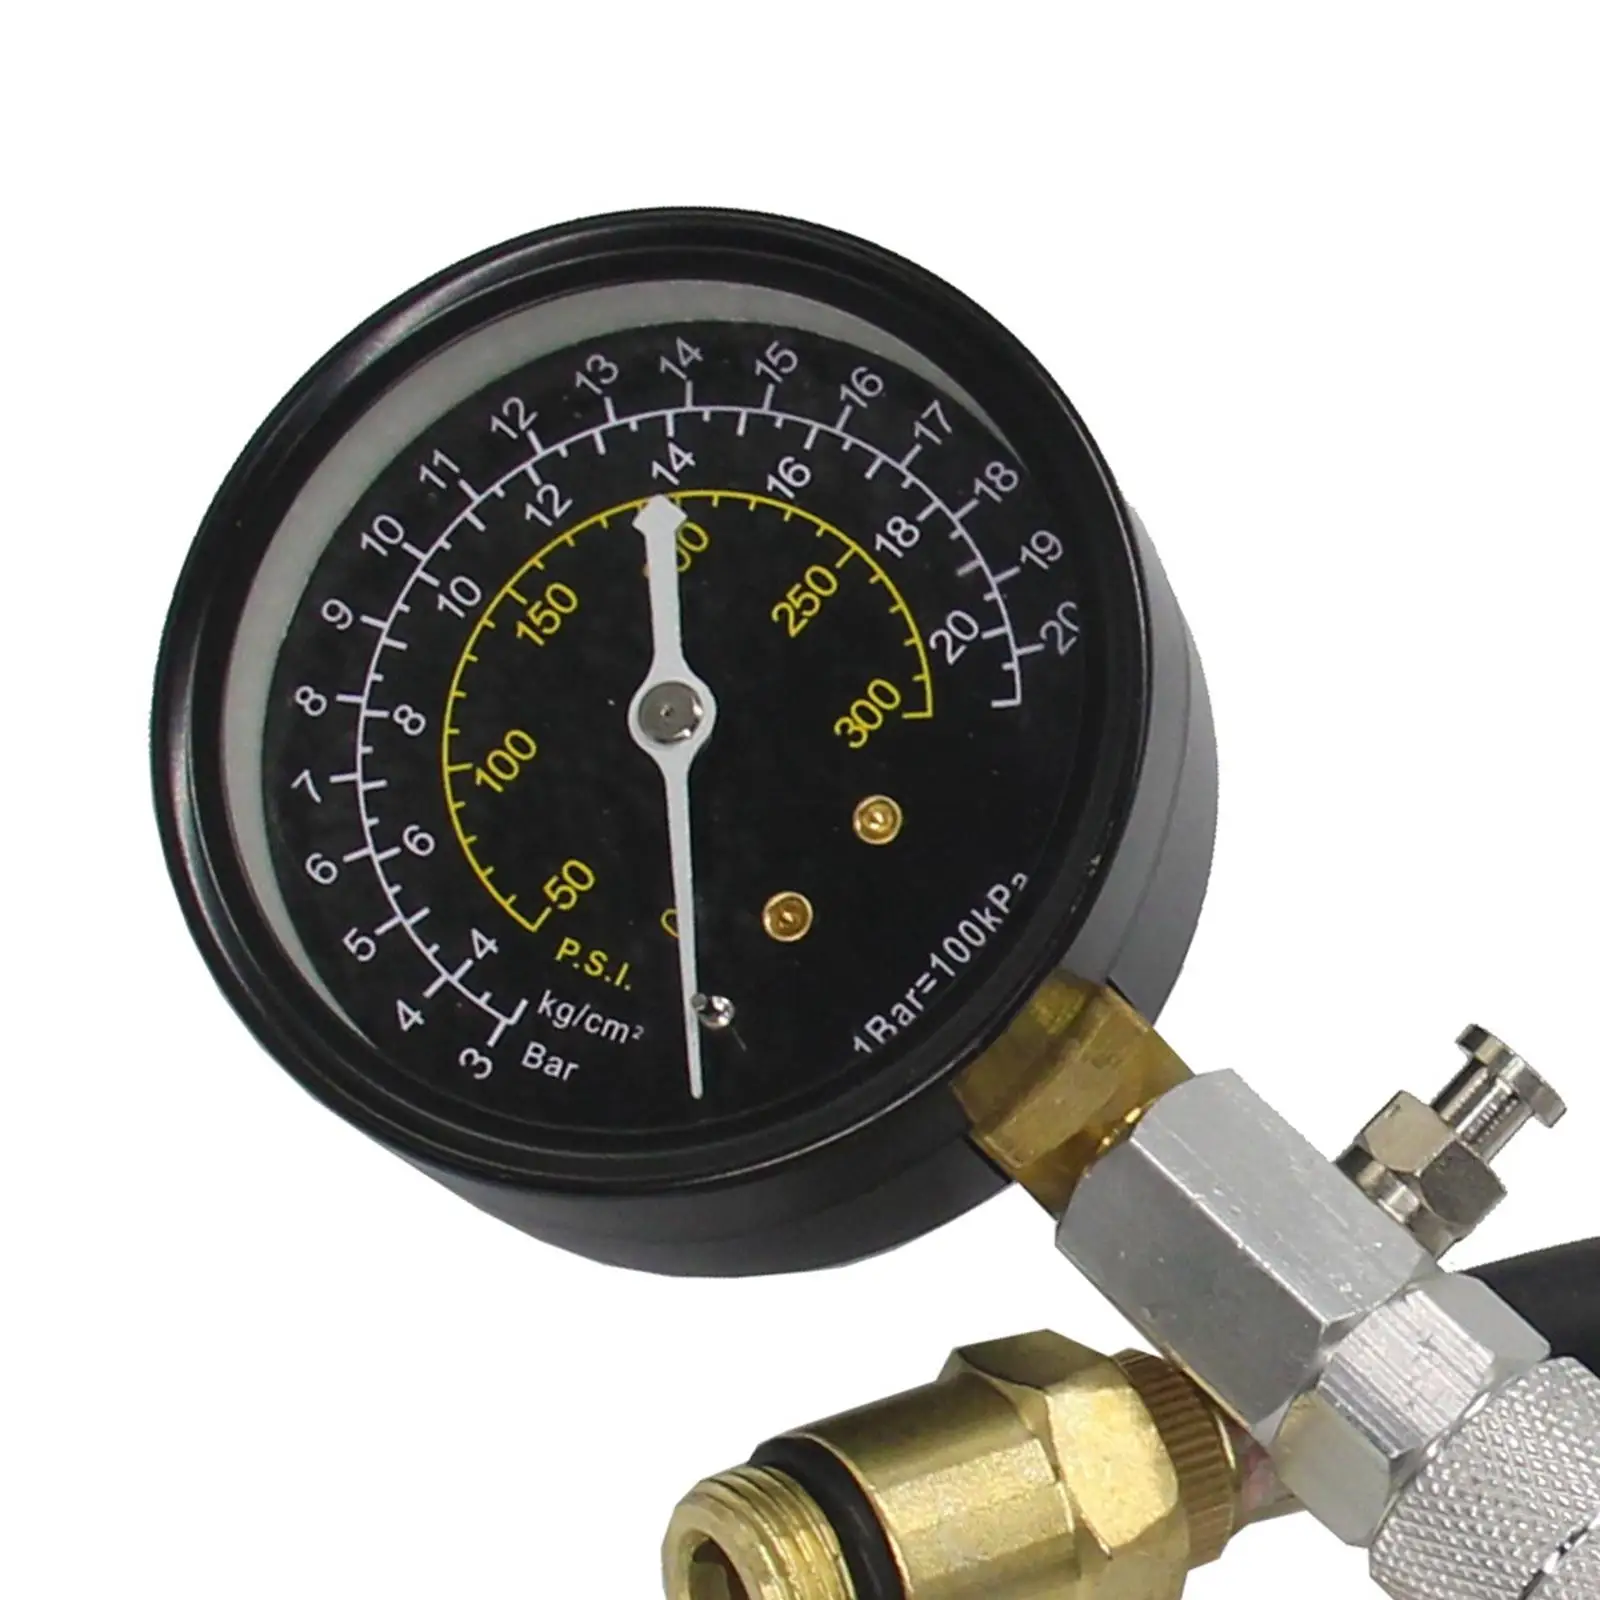 Compression 300 PSI Check Test Meter Auto Fits for Universal